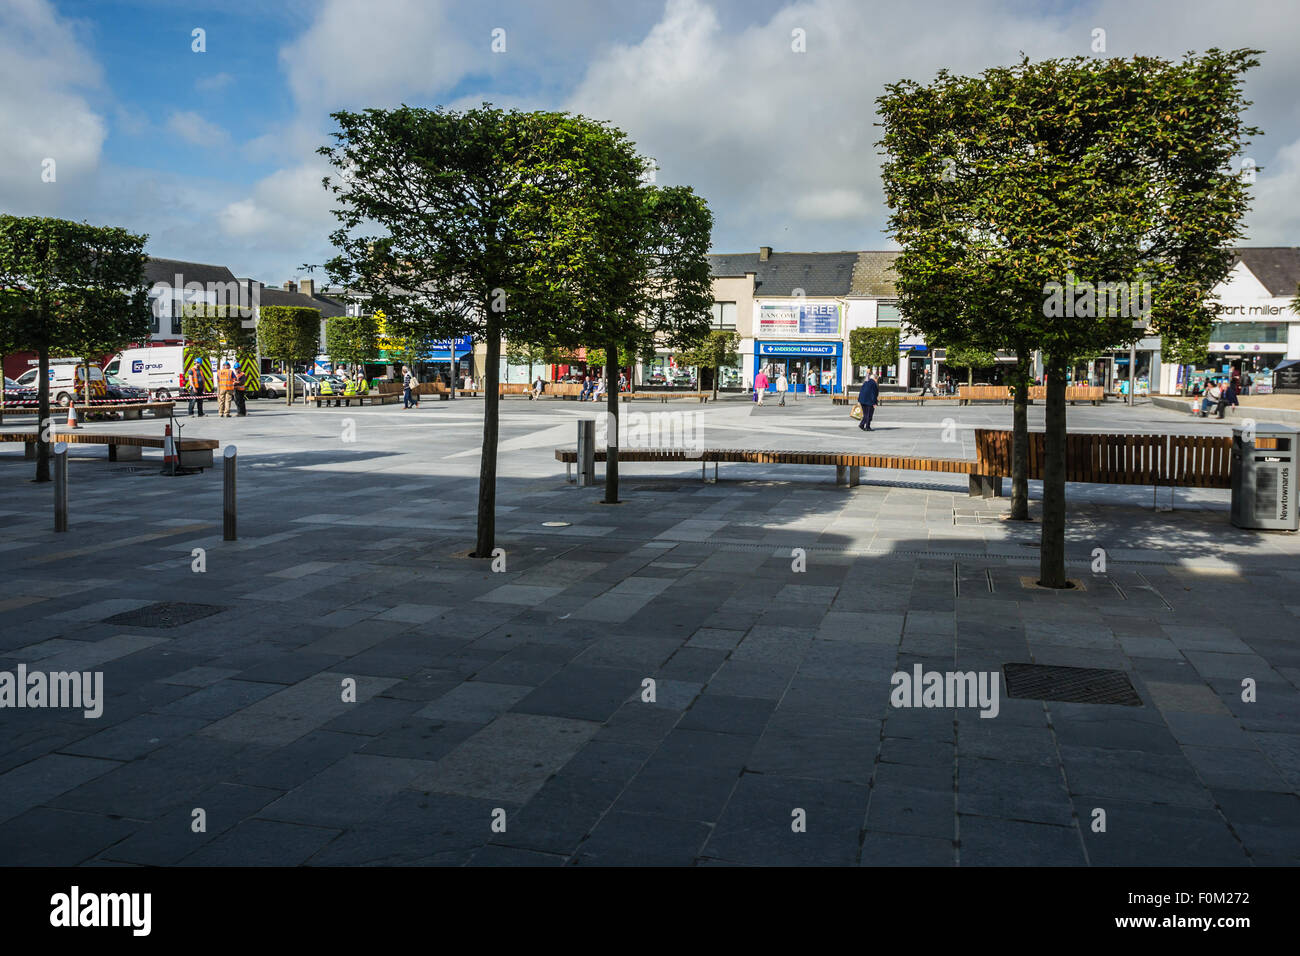 Newtownards, County Down, Northern Ireland, UK.   17th August, 2015.   Public Realm work nearing completion but still disrupting shopping and trade  Members of the public and Public Realm workers  The scheme, which is being match-funded and delivered by the Council, is intended to reinvigorate Newtownards, transforming the visual appearance of the town centre and enhancing its appeal as a place to visit and shop, generating a positive economic impact.  Work is due to be completed for Summer 2016.  Jeffrey Silvers/Alamy Live News Stock Photo